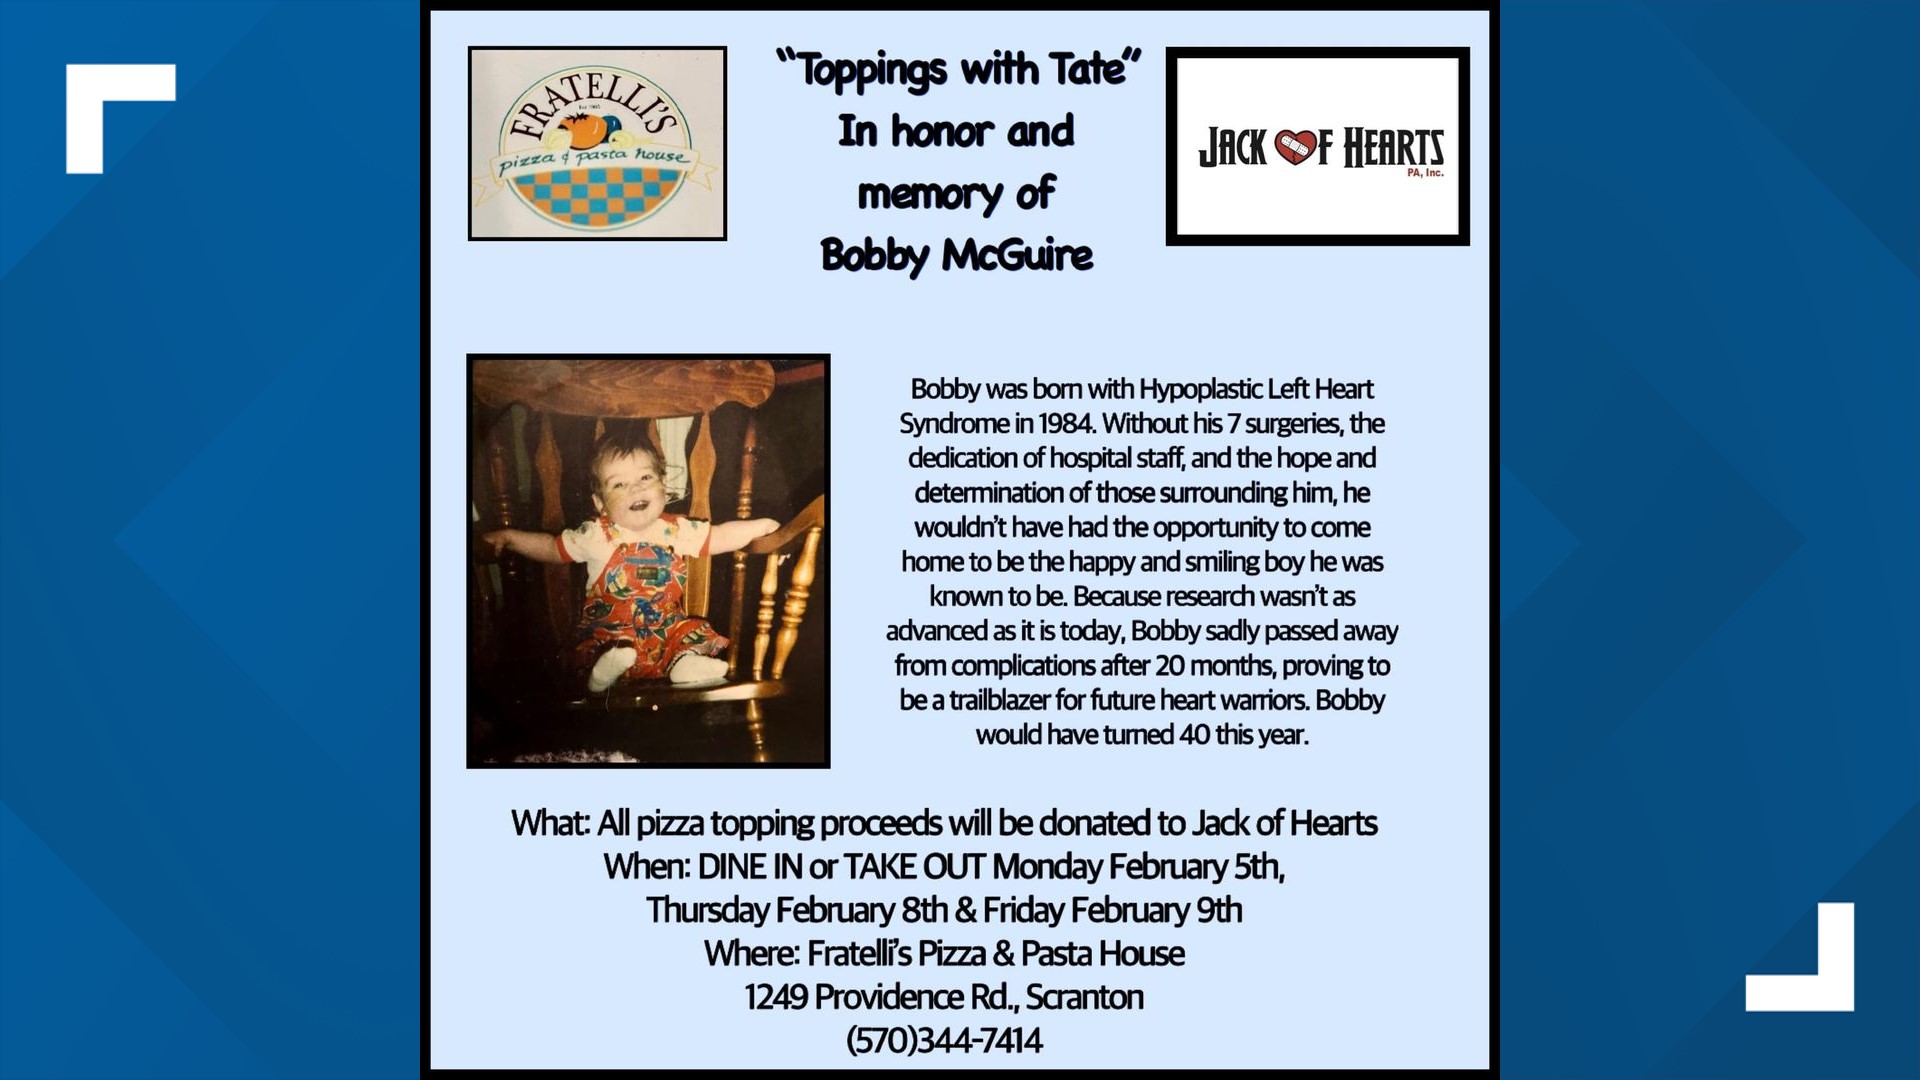 The fundraiser held at Fratelli's Pizza & Pasta House in Scranton will donate proceeds from additional pizza toppings to Jack of Hearts-PA.